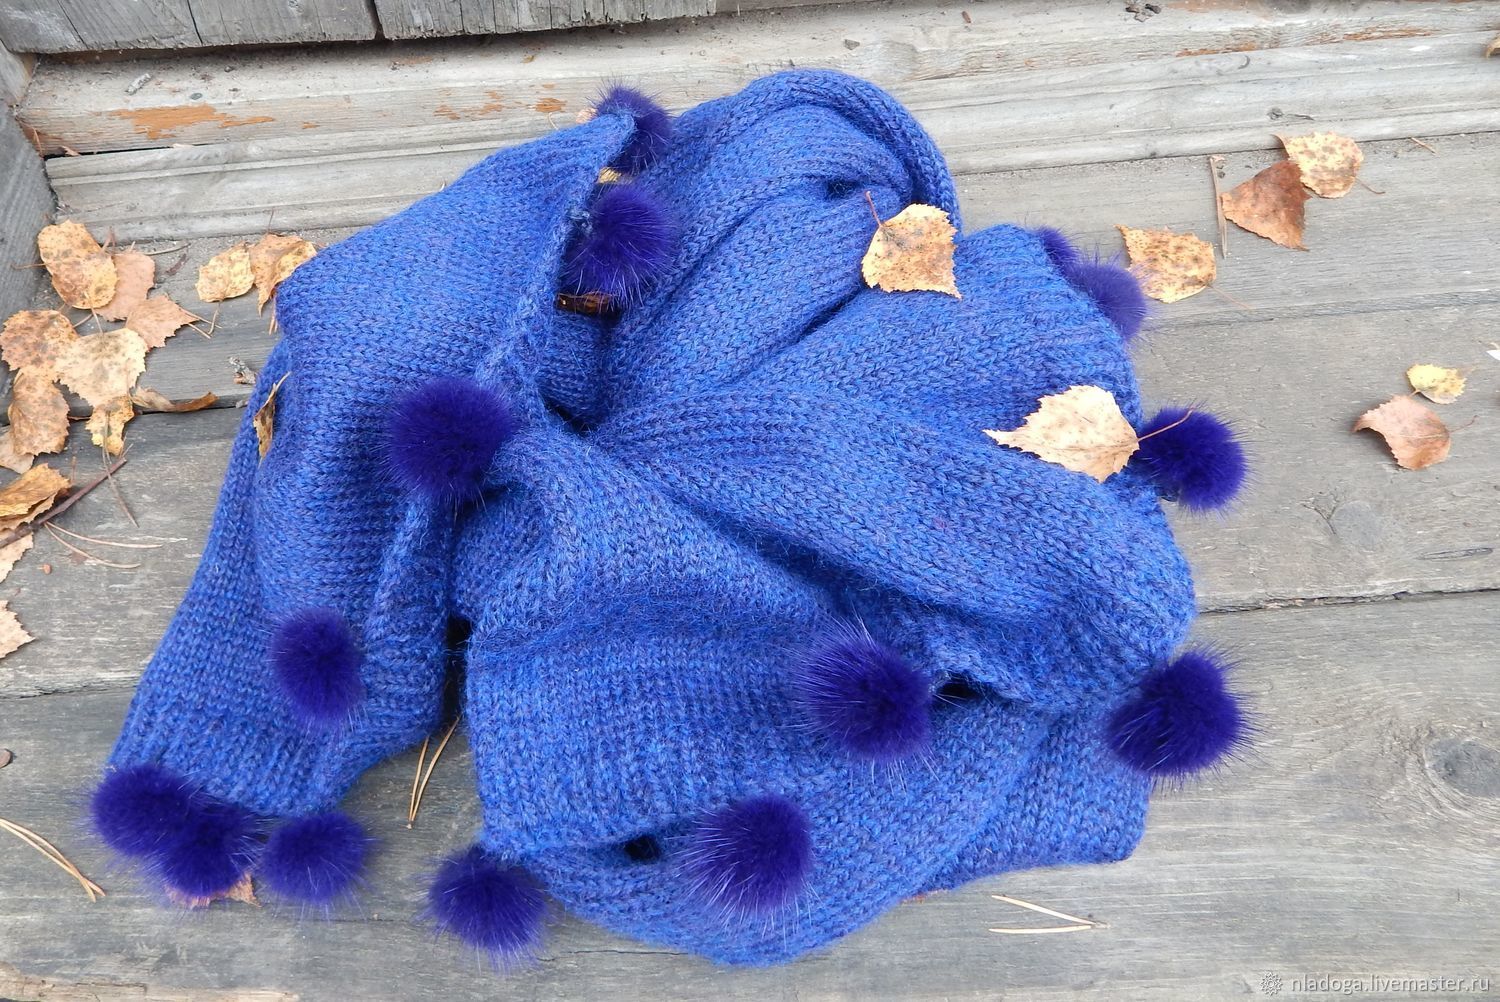 scarf, stole-handmade
buy blue knitted scarf, stole
blue knitted scarf, stole buy
warm knitted scarf buy
blue knitted stole to buy
buy blue warm stole
handmade 
knitted blue tippet buy
blue ti